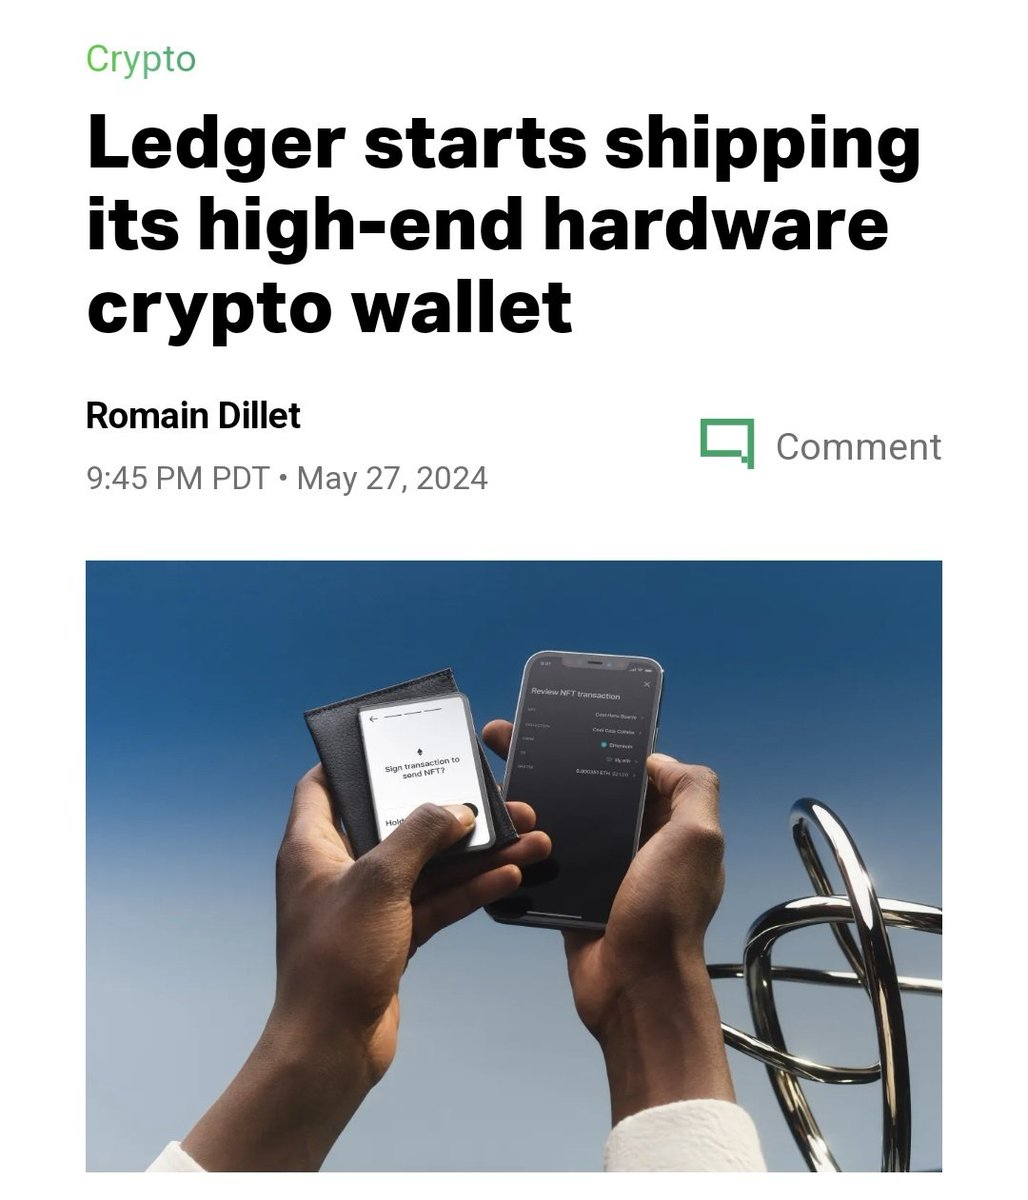 #Ledger, a French startup mostly known for its secure #Crypto hardware wallets, has started shipping new wallets nearly 18 months after announcing the latest Ledger Stax devices. @Ledger

#Cryptocurrency #Bitcoin #ETH #BTC